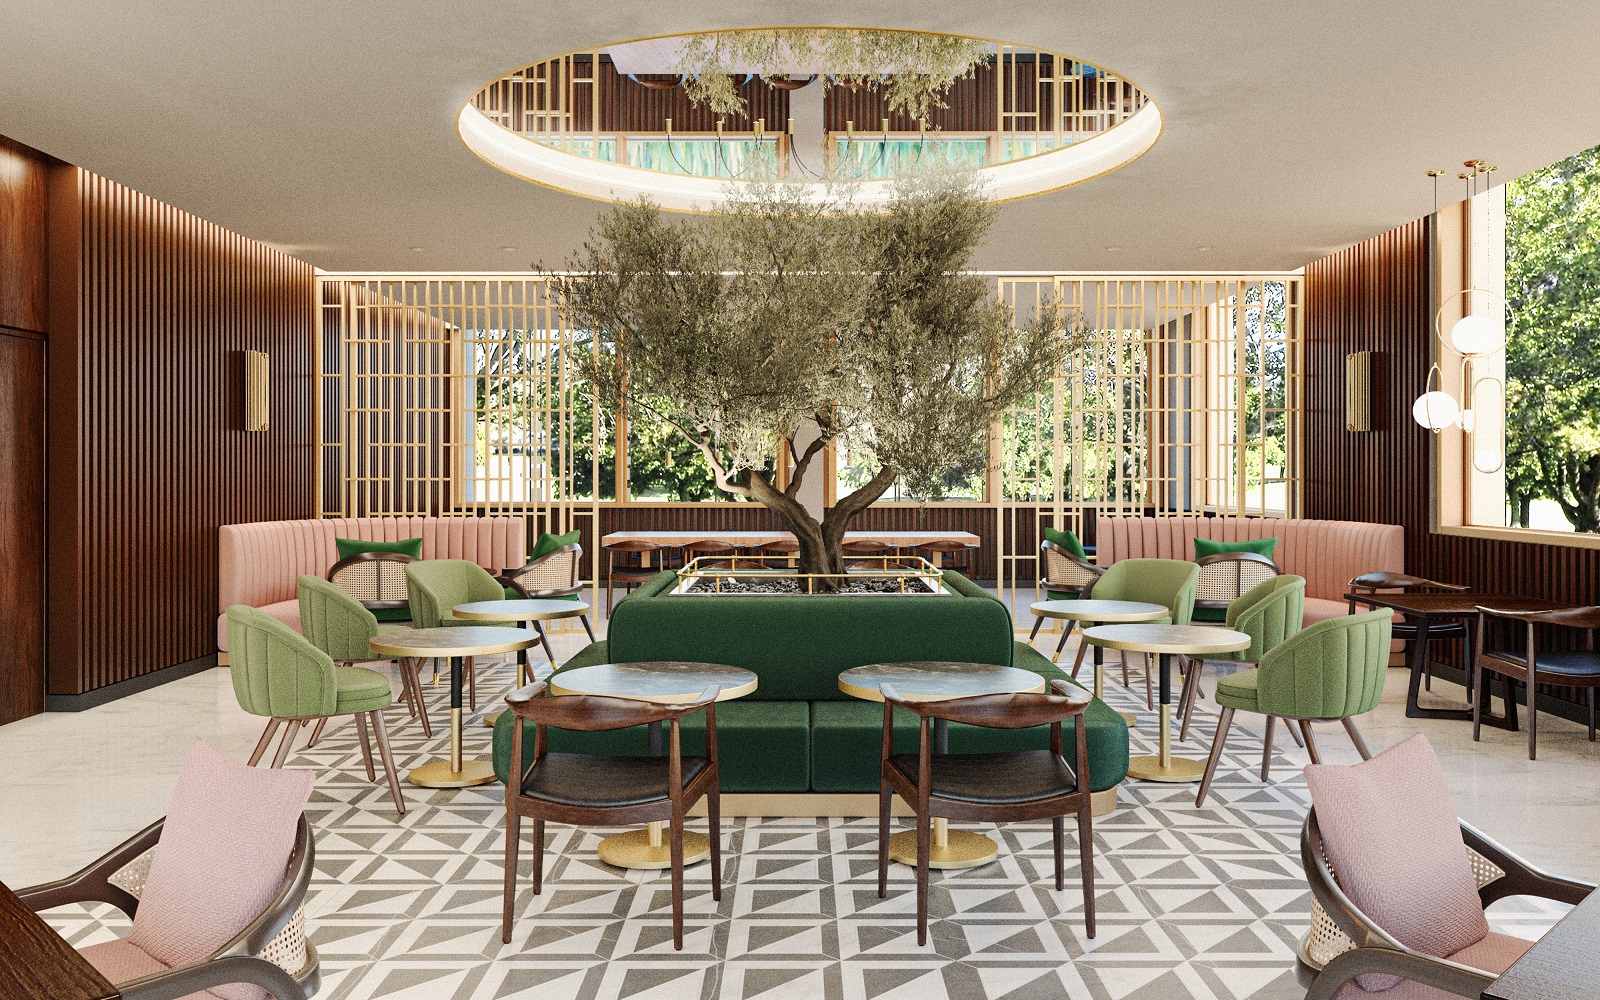 Renaissance Hotels to debut in Portugal